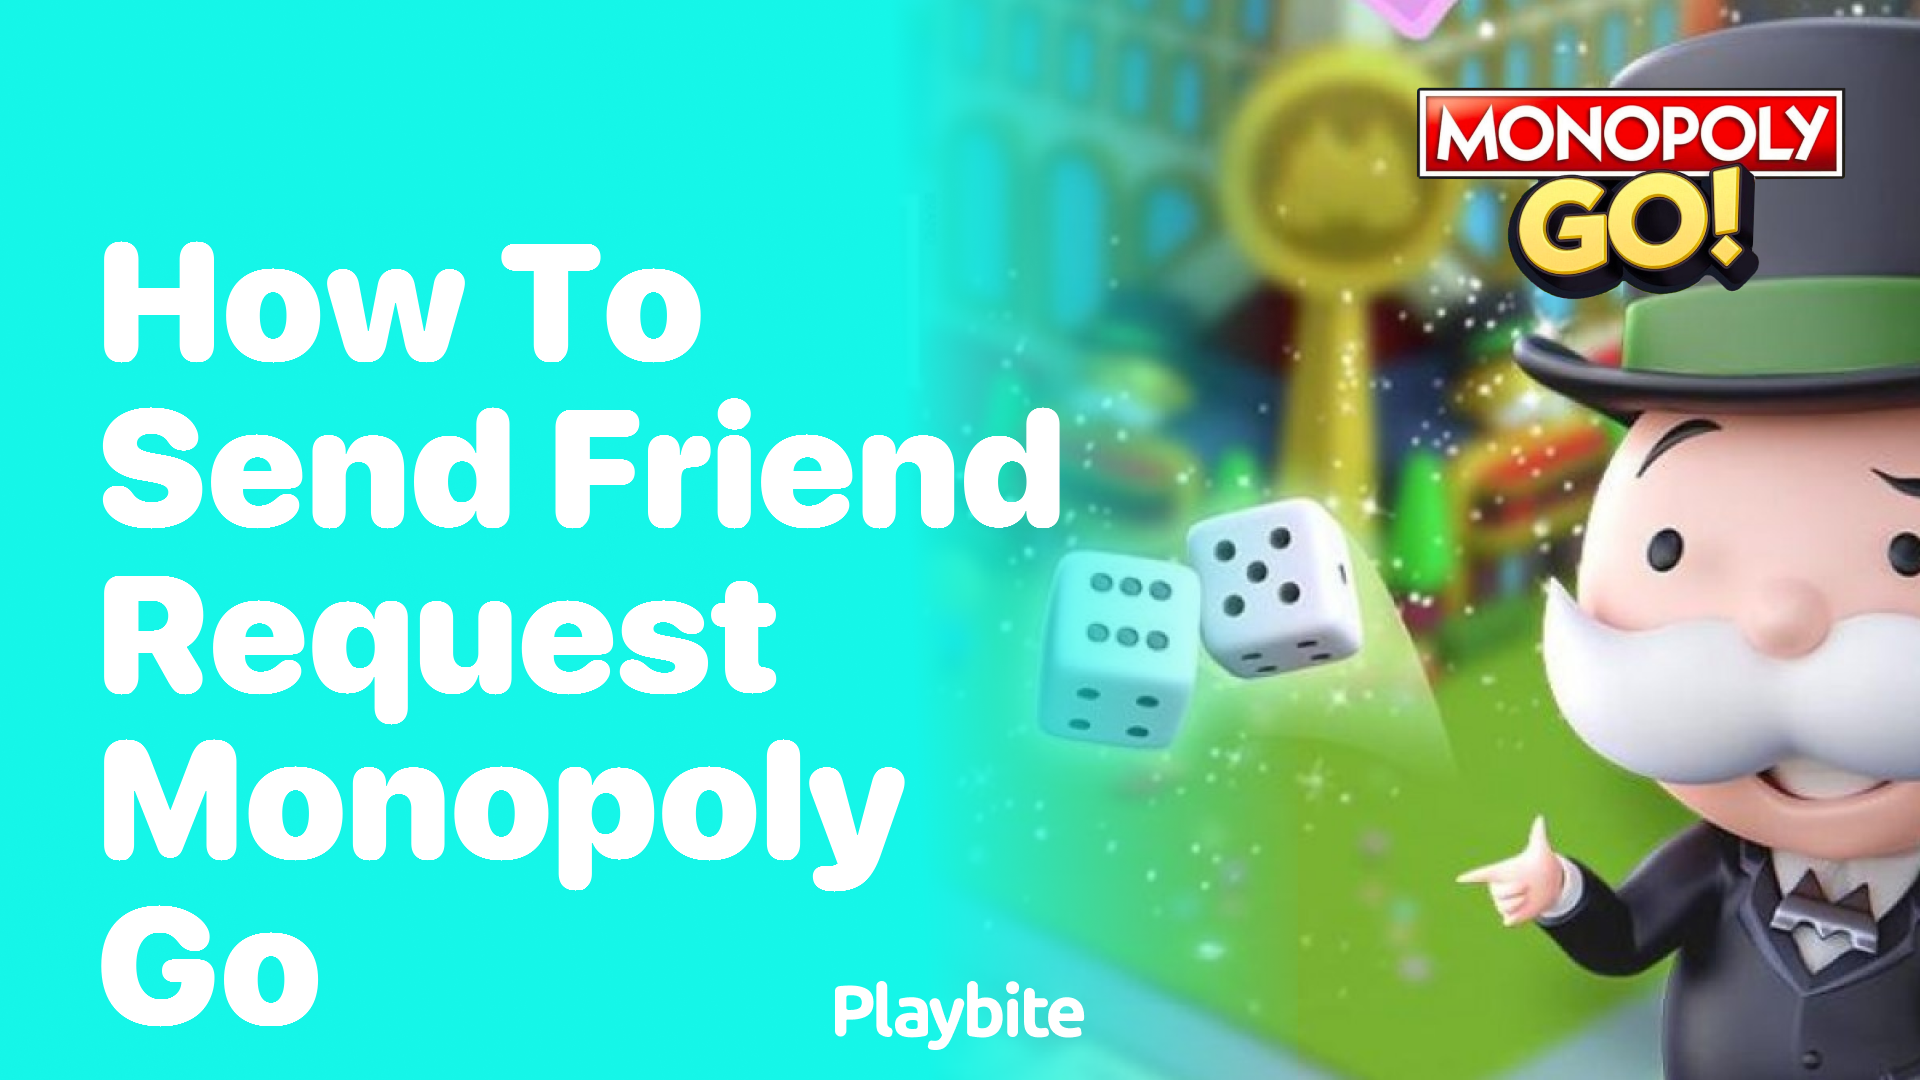 How to Send a Friend Request in Monopoly Go